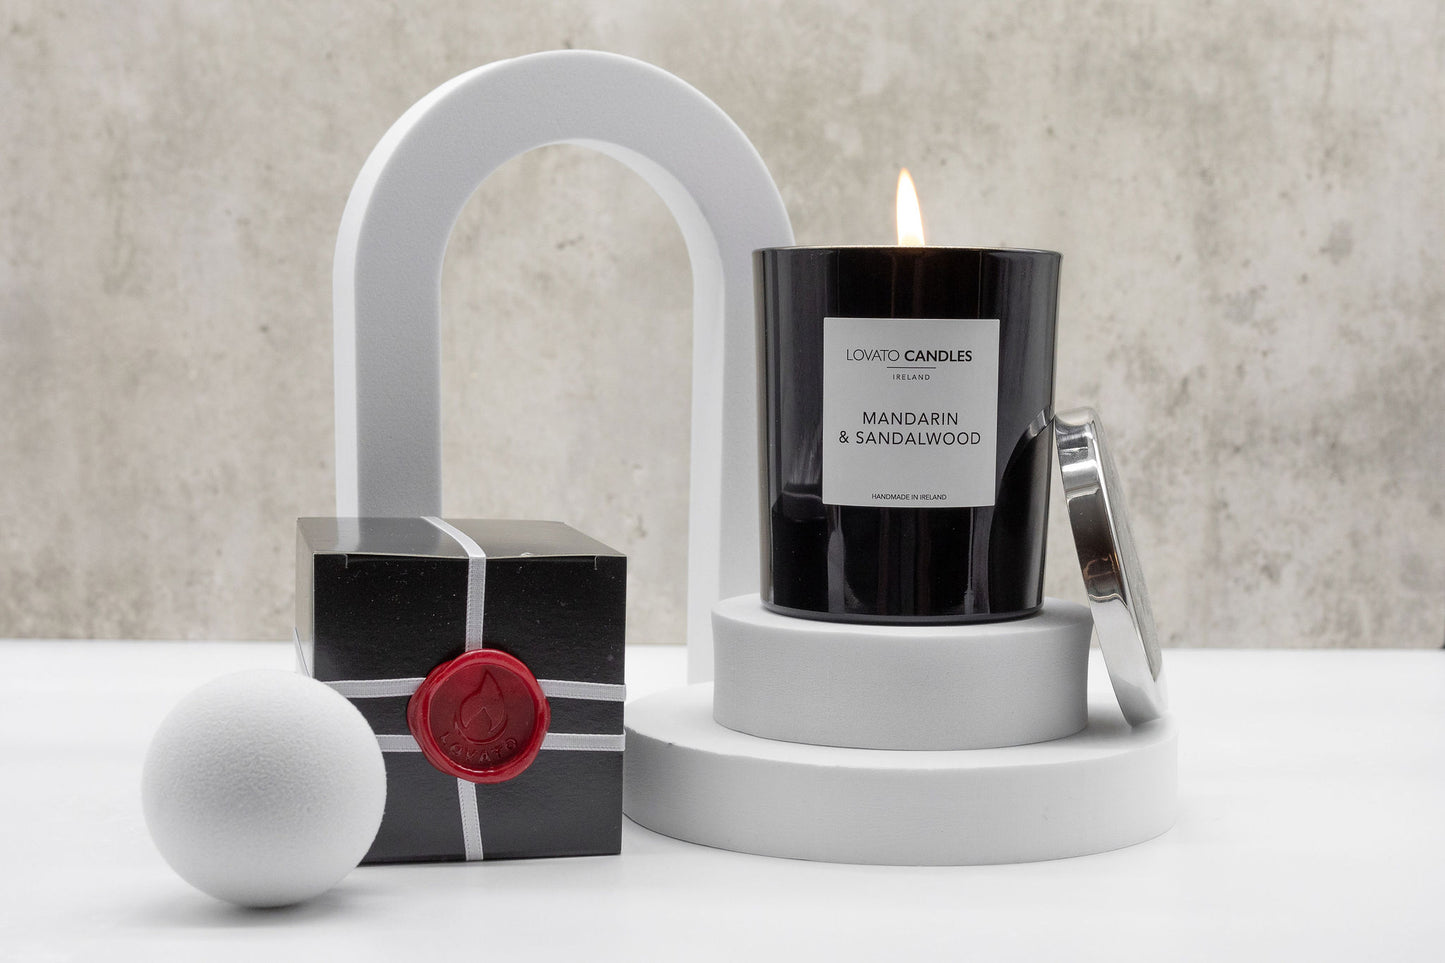 Clear Scented Candle with Luxury Black Box - Mandarin & Sandalwood